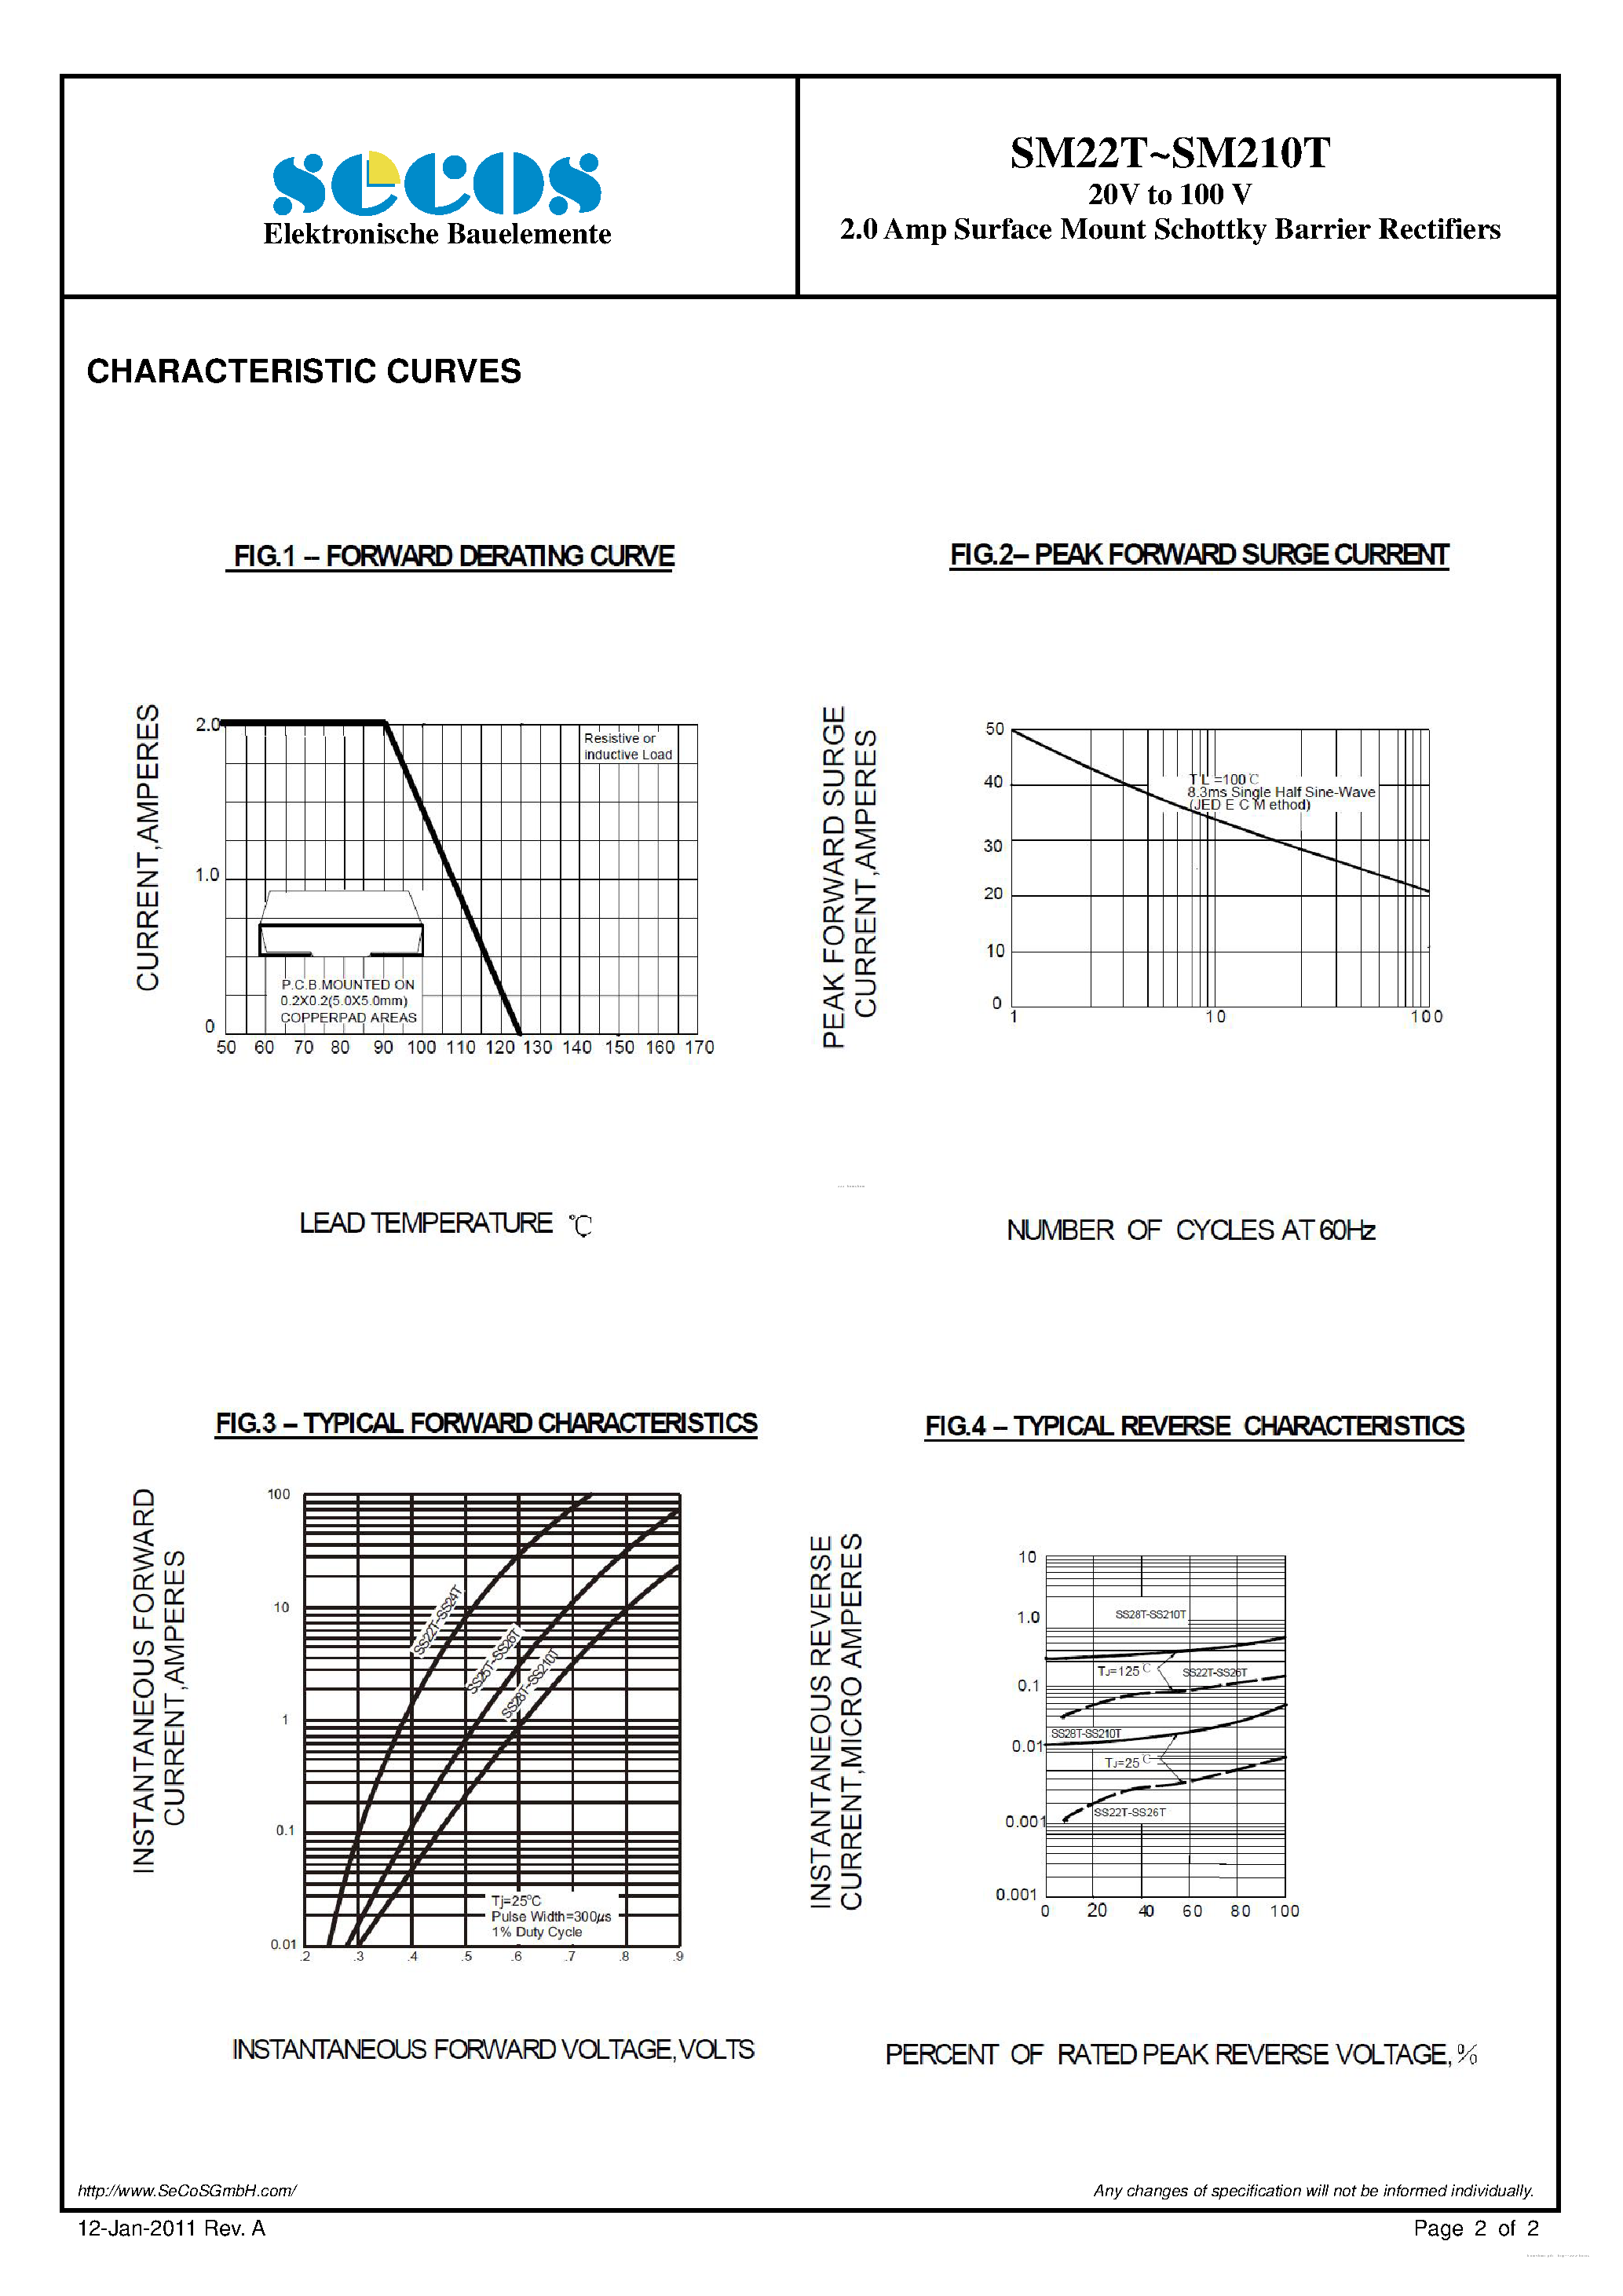 Datasheet SM210T - (SM22T - SM210T) Surface Mount Schottky Barrier Rectifiers page 2